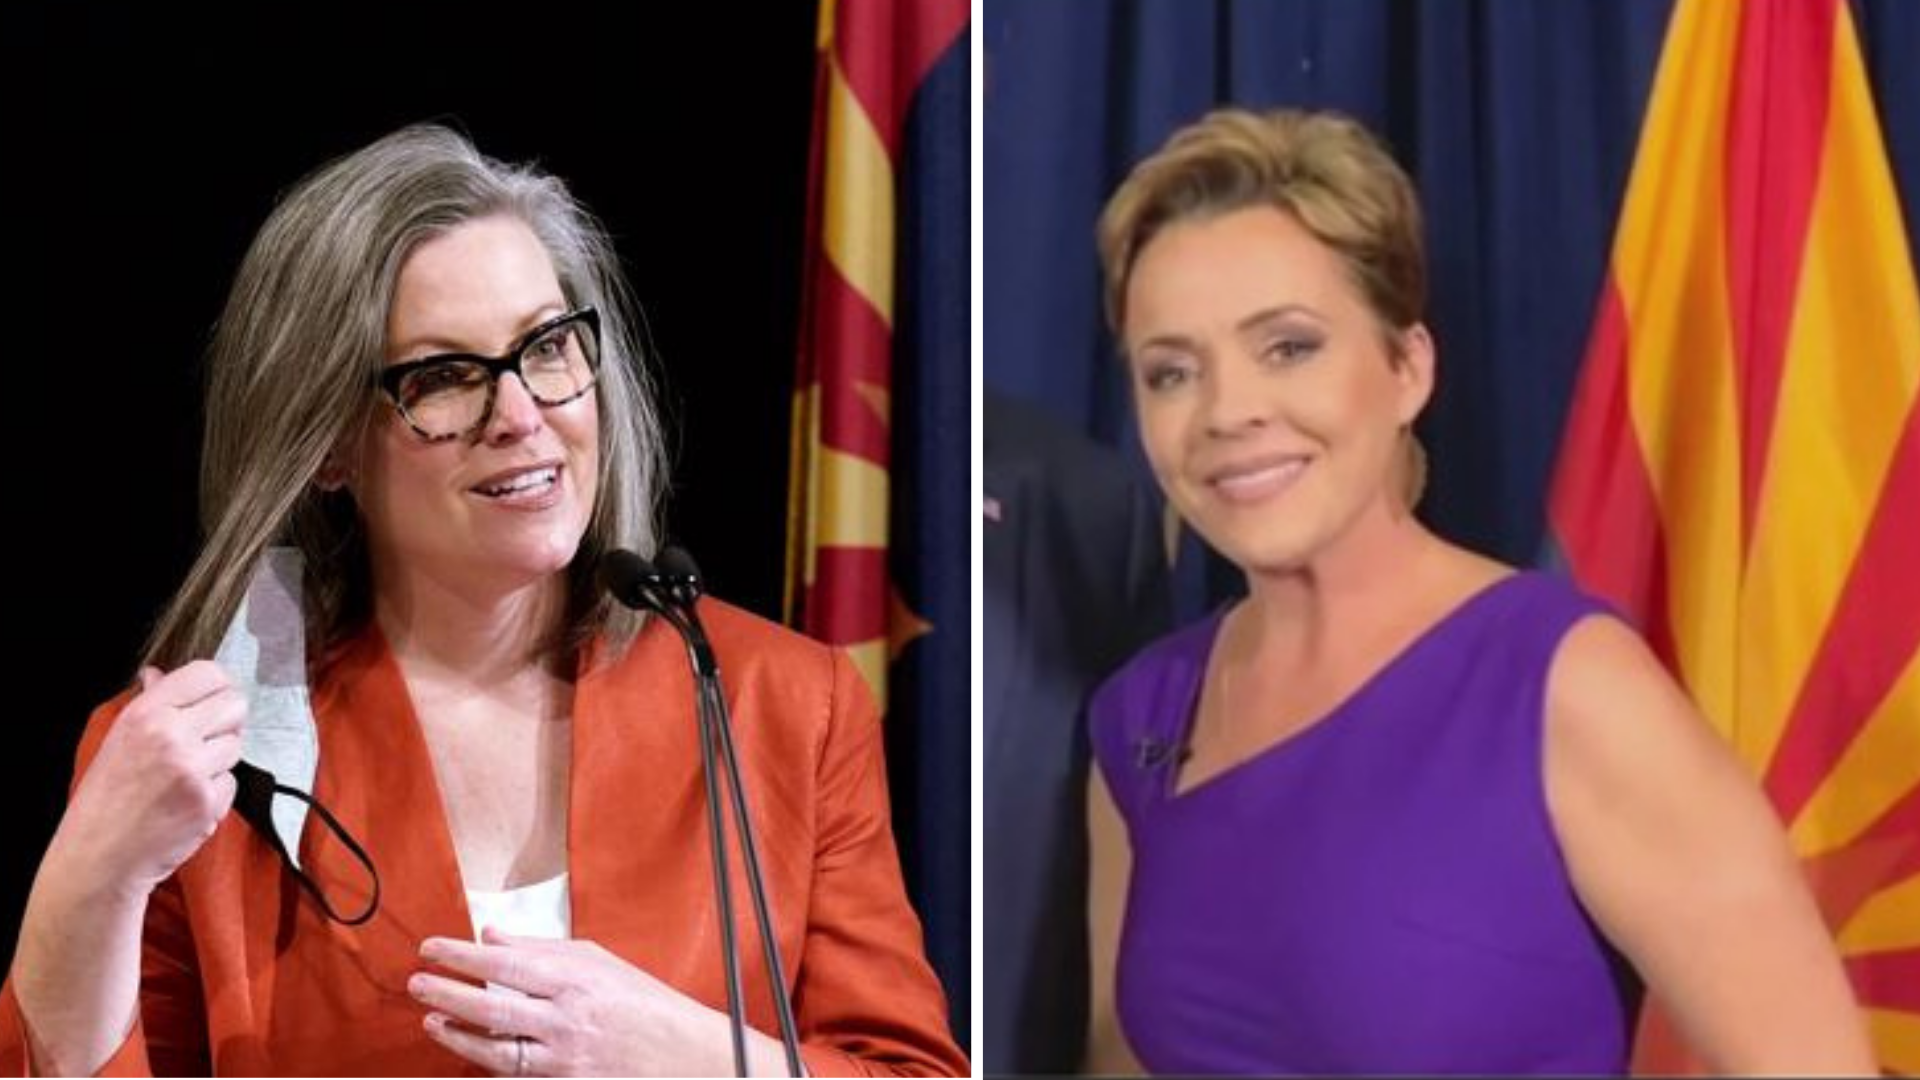 The race for Arizona governor is heating up as a war of words escalates between two candidates. Kari Lake raised eyebrows with a comment about elections officials.